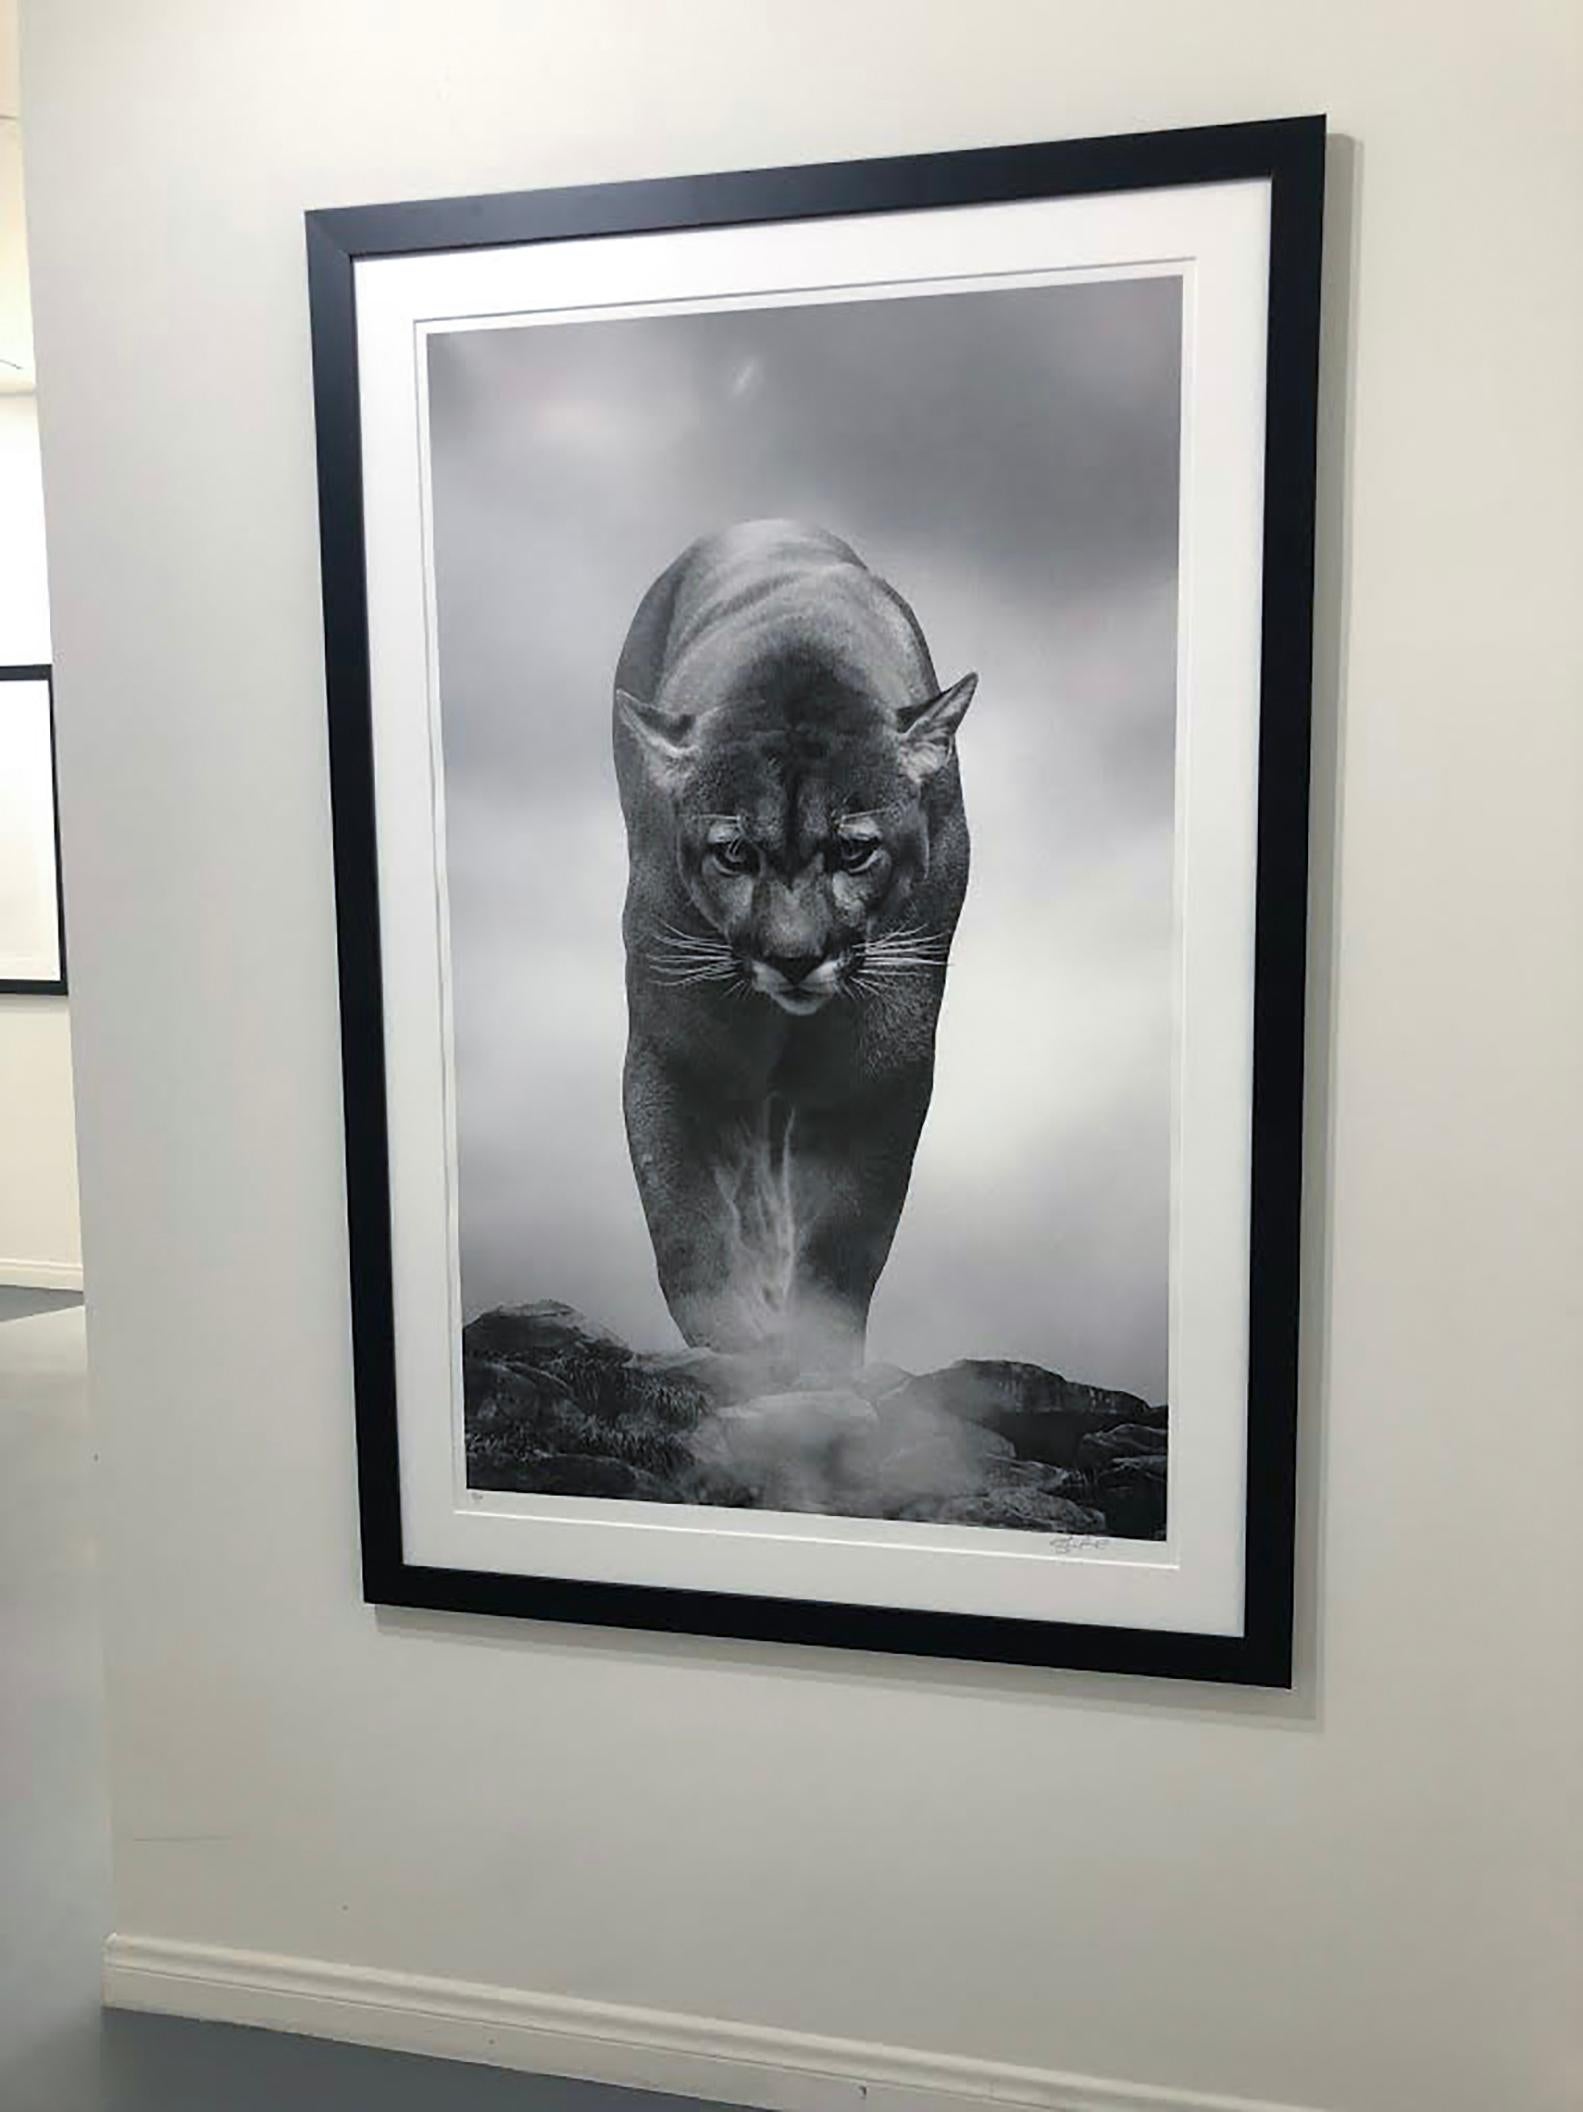  36x48 Unsigned Test Print  Photography, Cougar, Mountain Lion Western Art - Gray Black and White Photograph by Shane Russeck